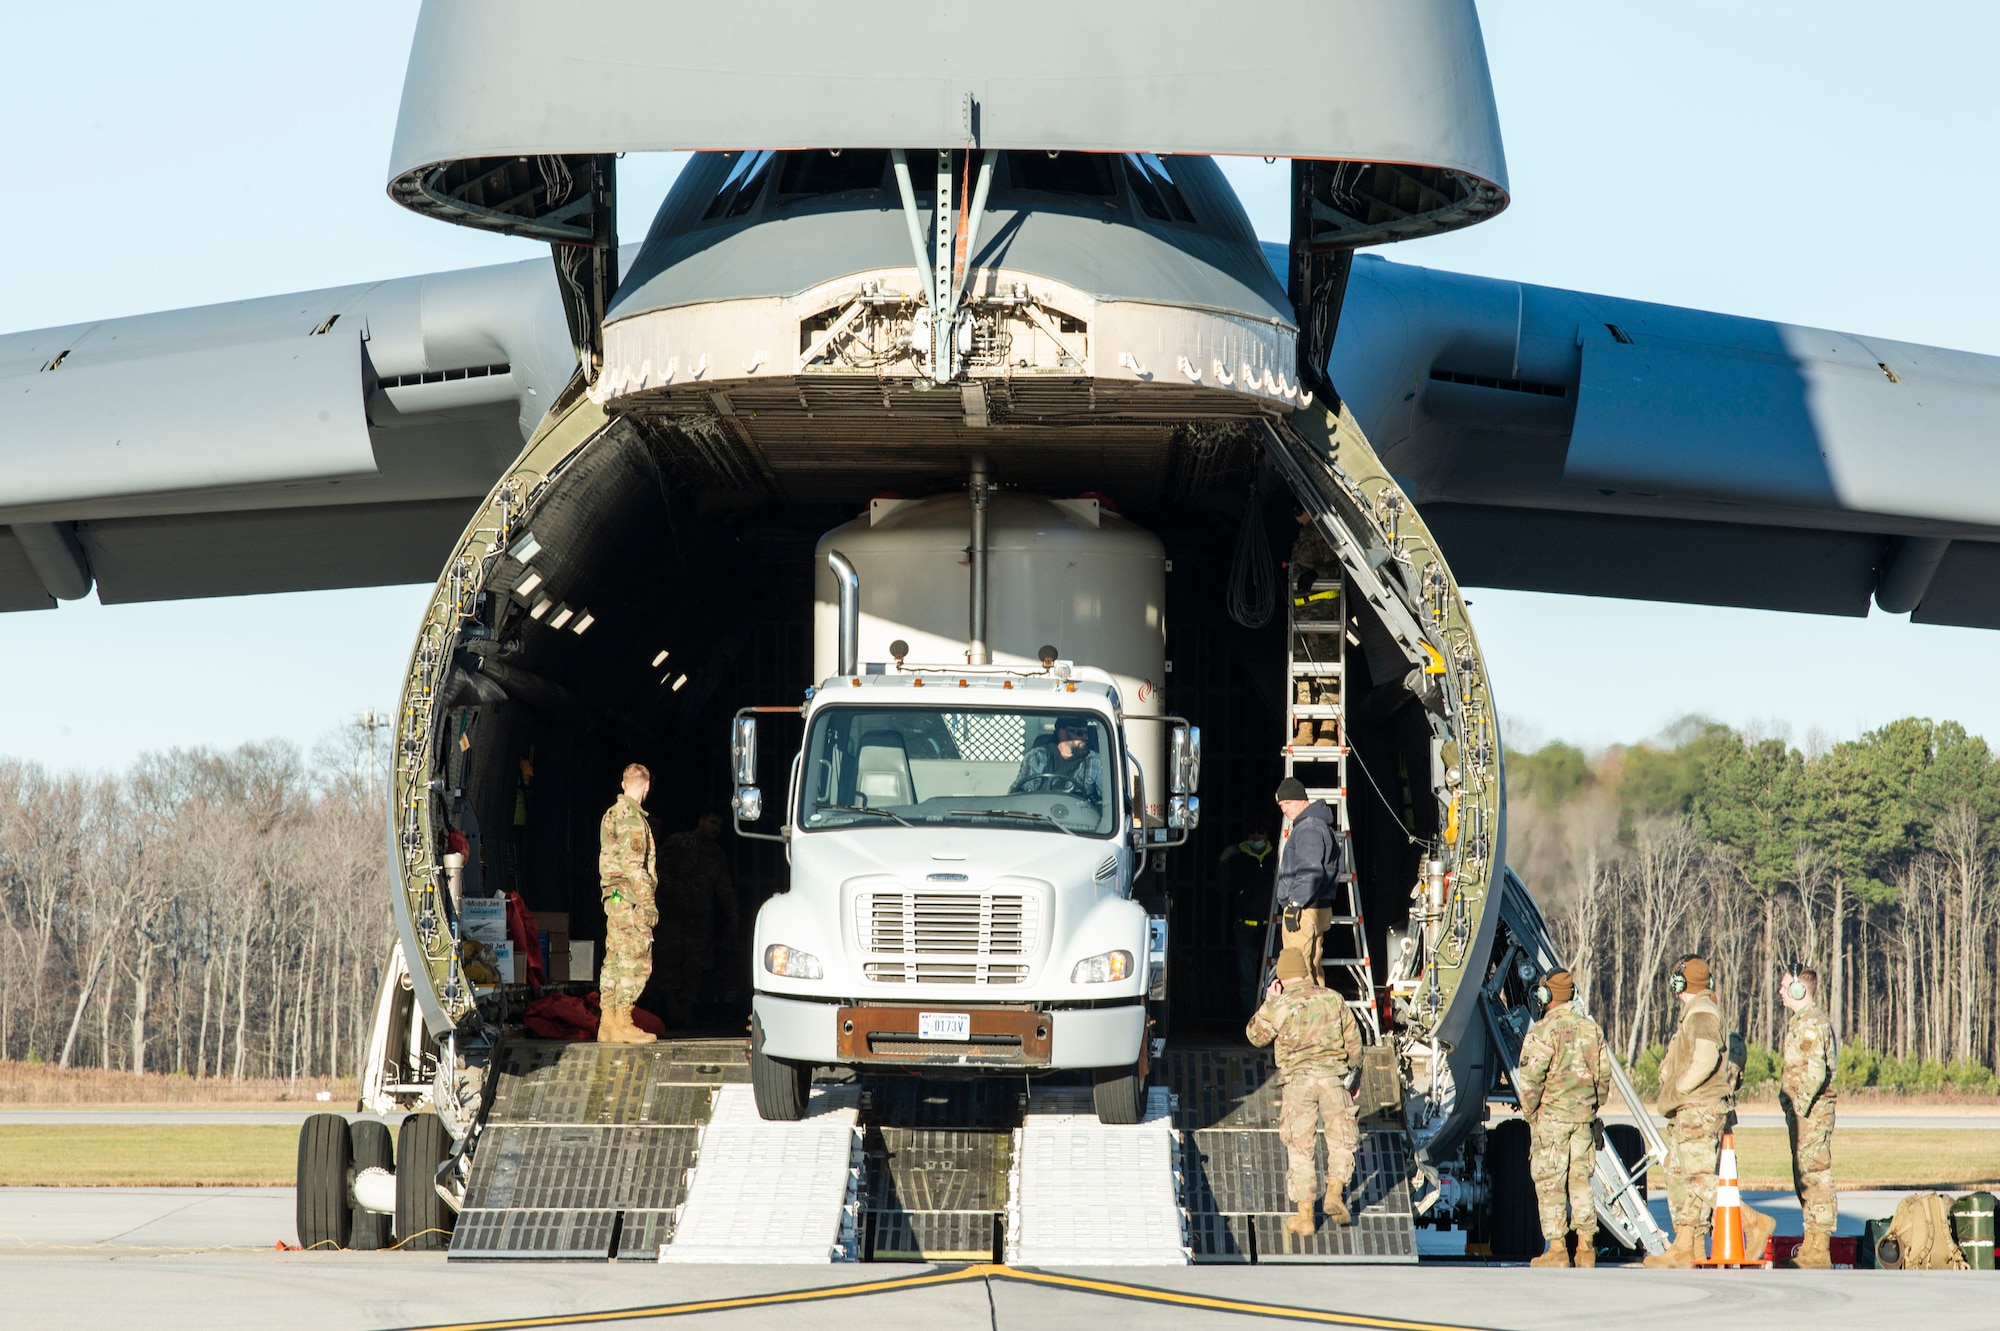 Tony Forcier, 436th Aerial Port Squadron ramp services foreman, backs up a trailer loaded with water filtration equipment onto a C-5M Super Galaxy at Dover Air Force Base, Delaware, Dec. 20, 2021. An aircrew from the 9th Airlift Squadron flew the equipment to Joint Base Pearl Harbor-Hickam (JBPHH), Hawaii. The JBPHH water quality recovery is a joint U.S. military initiative working closely with the State of Hawaii, Department of Health, Honolulu Board of Water Supply, U.S. government and independent organizations to restore a safe water delivery system to JBPHH military housing communities through testing, treatment, and repair. For detailed information, including available resources and locations, and news, go to www.navy.mil/jointbasewater.  (U.S. Air Force photo by Roland Balik)